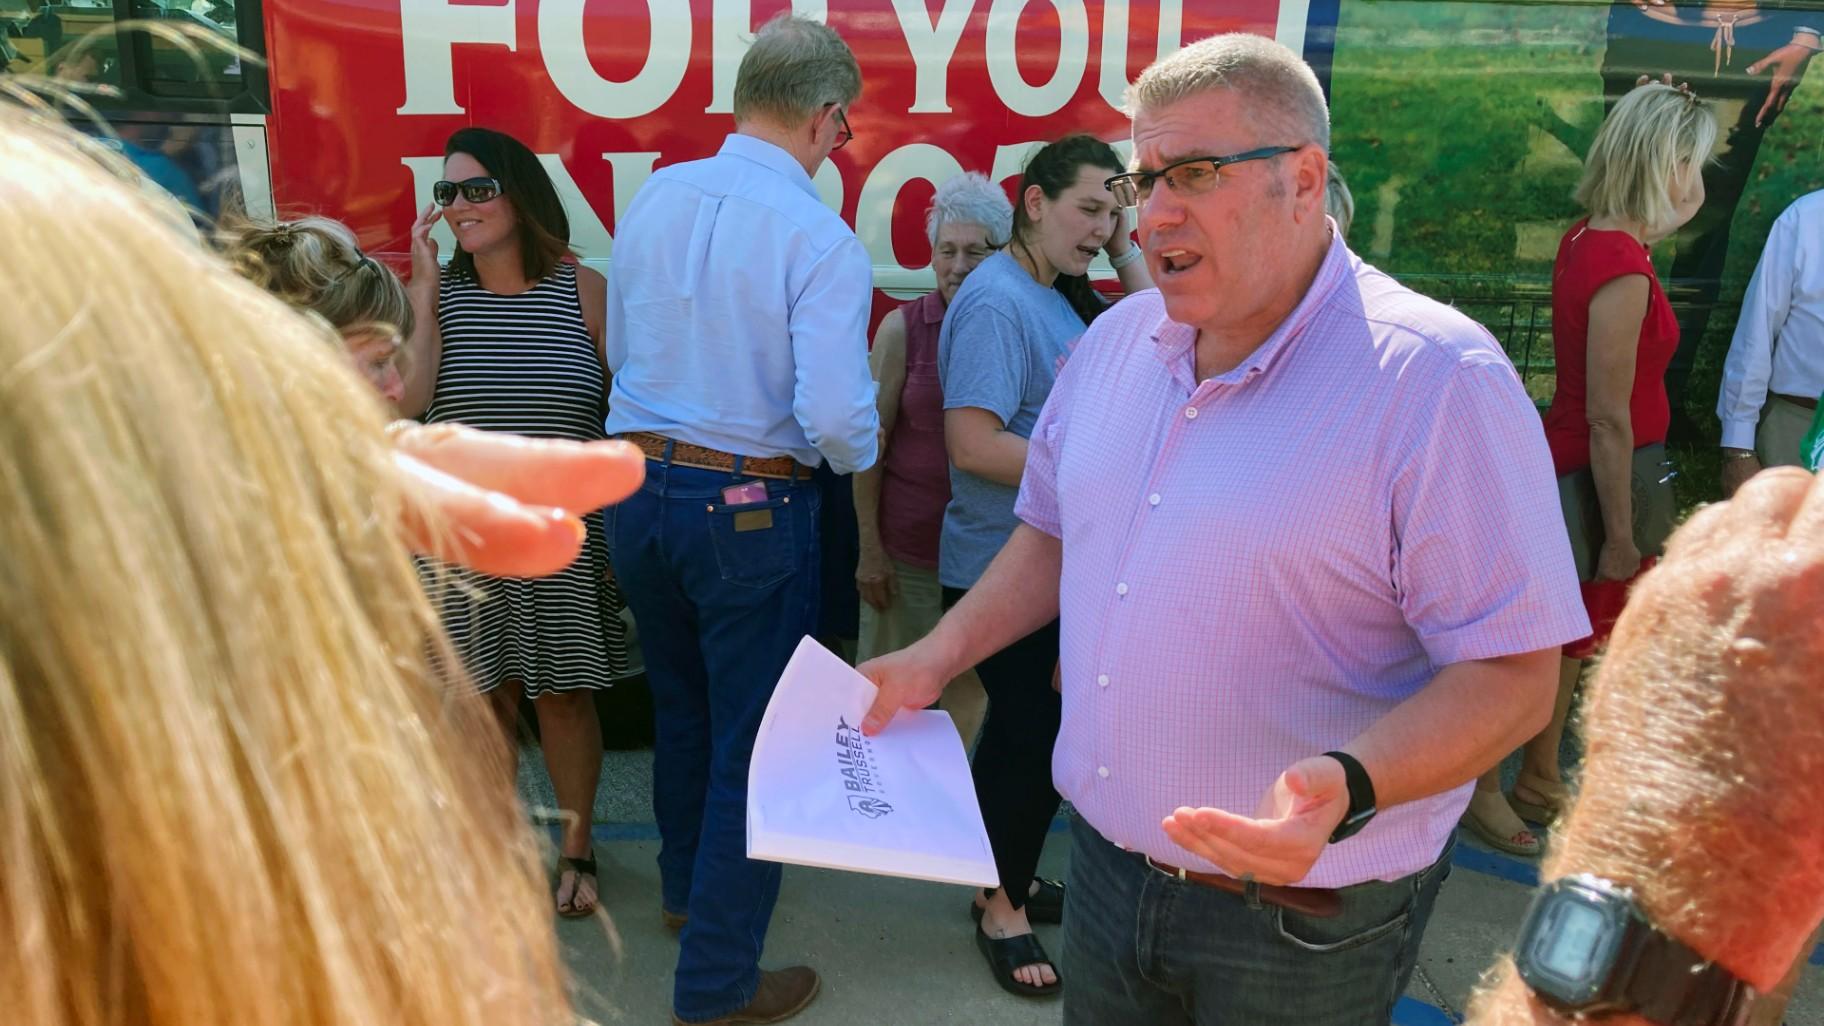 Illinois Republican gubernatorial candidate Darren Bailey speaks to voters during a campaign stop in Athens, Ill., June 14, 2022. (AP Photo / John O'Connor, File)